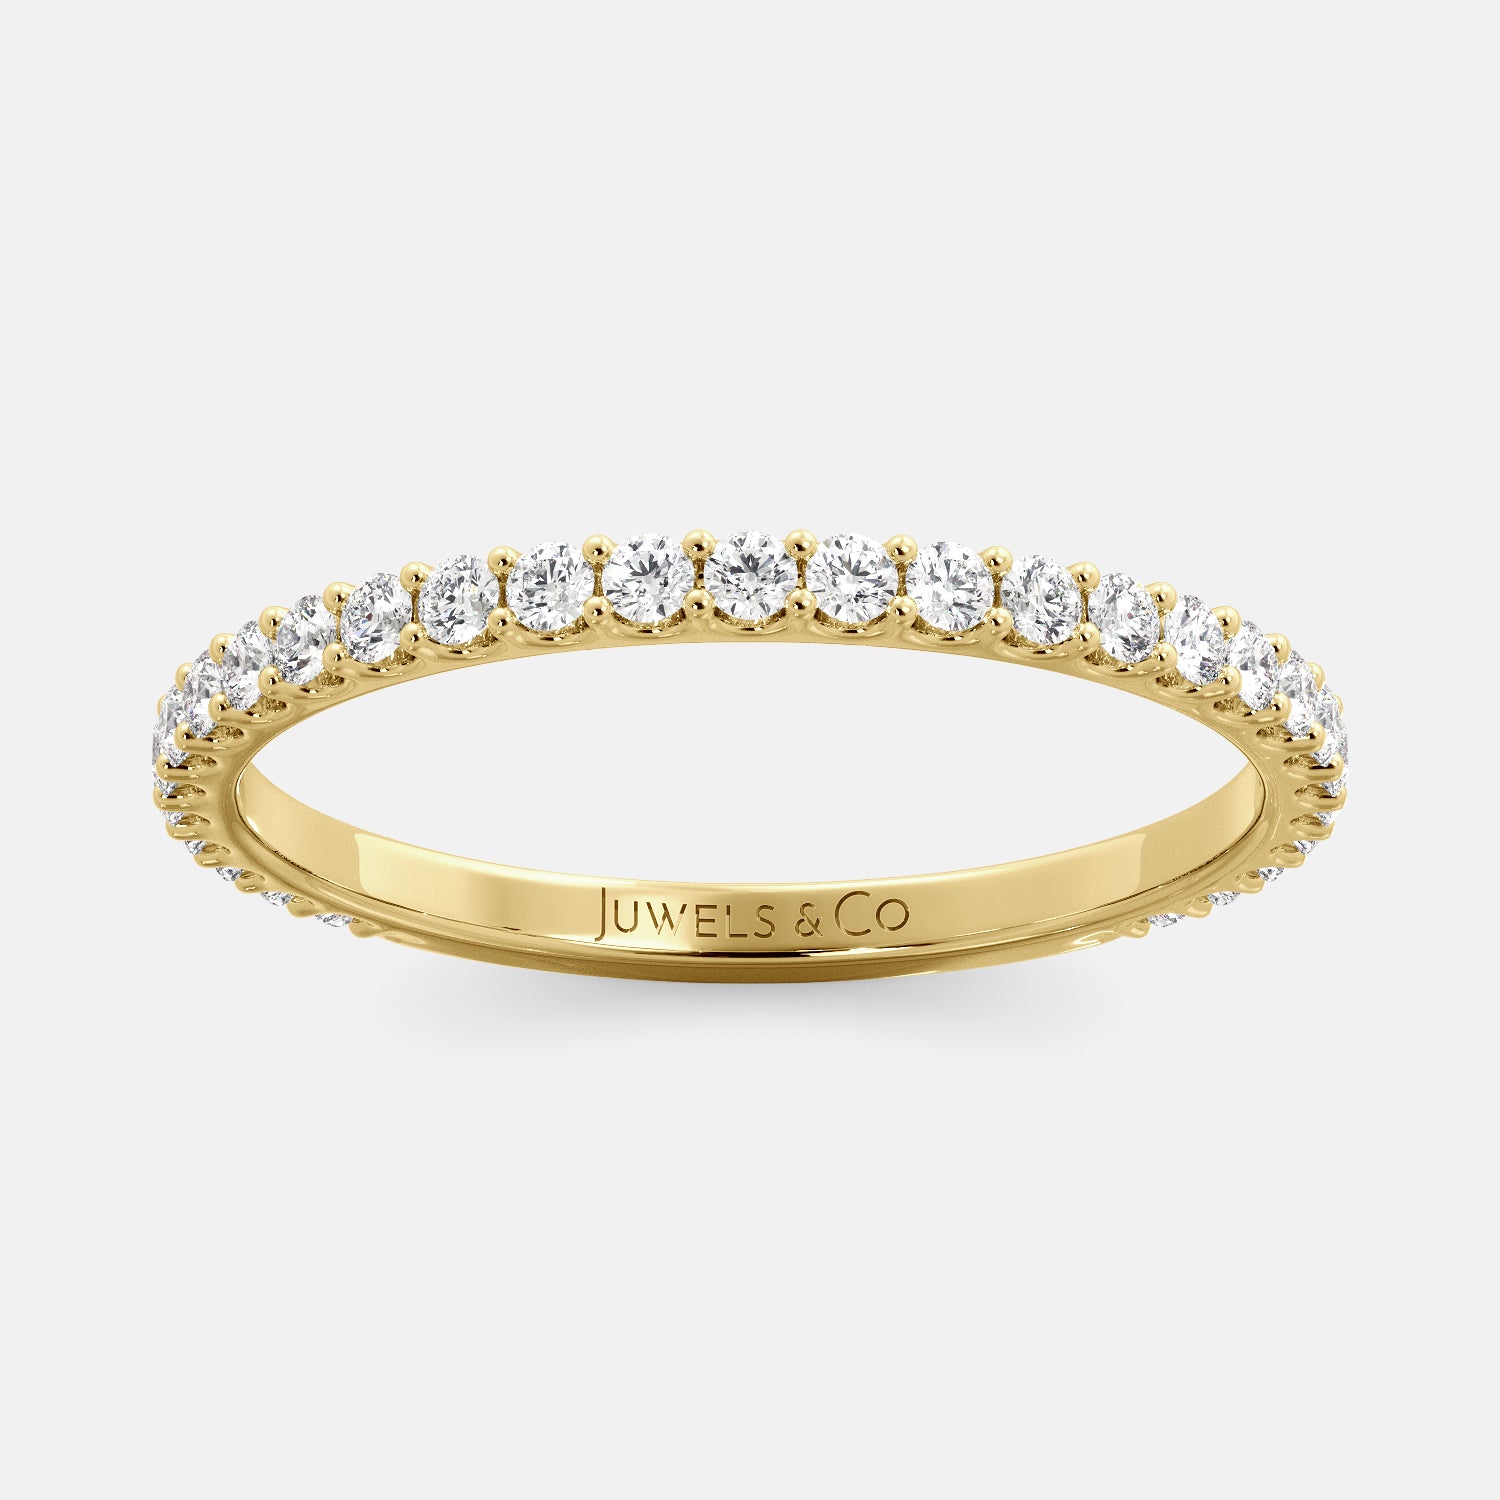 A close-up of a yellow gold half eternity wedding band with a row of round diamonds. The band is a classic and timeless design that is perfect for any occasion. The diamonds sparkle and shine, adding a touch of glamour.